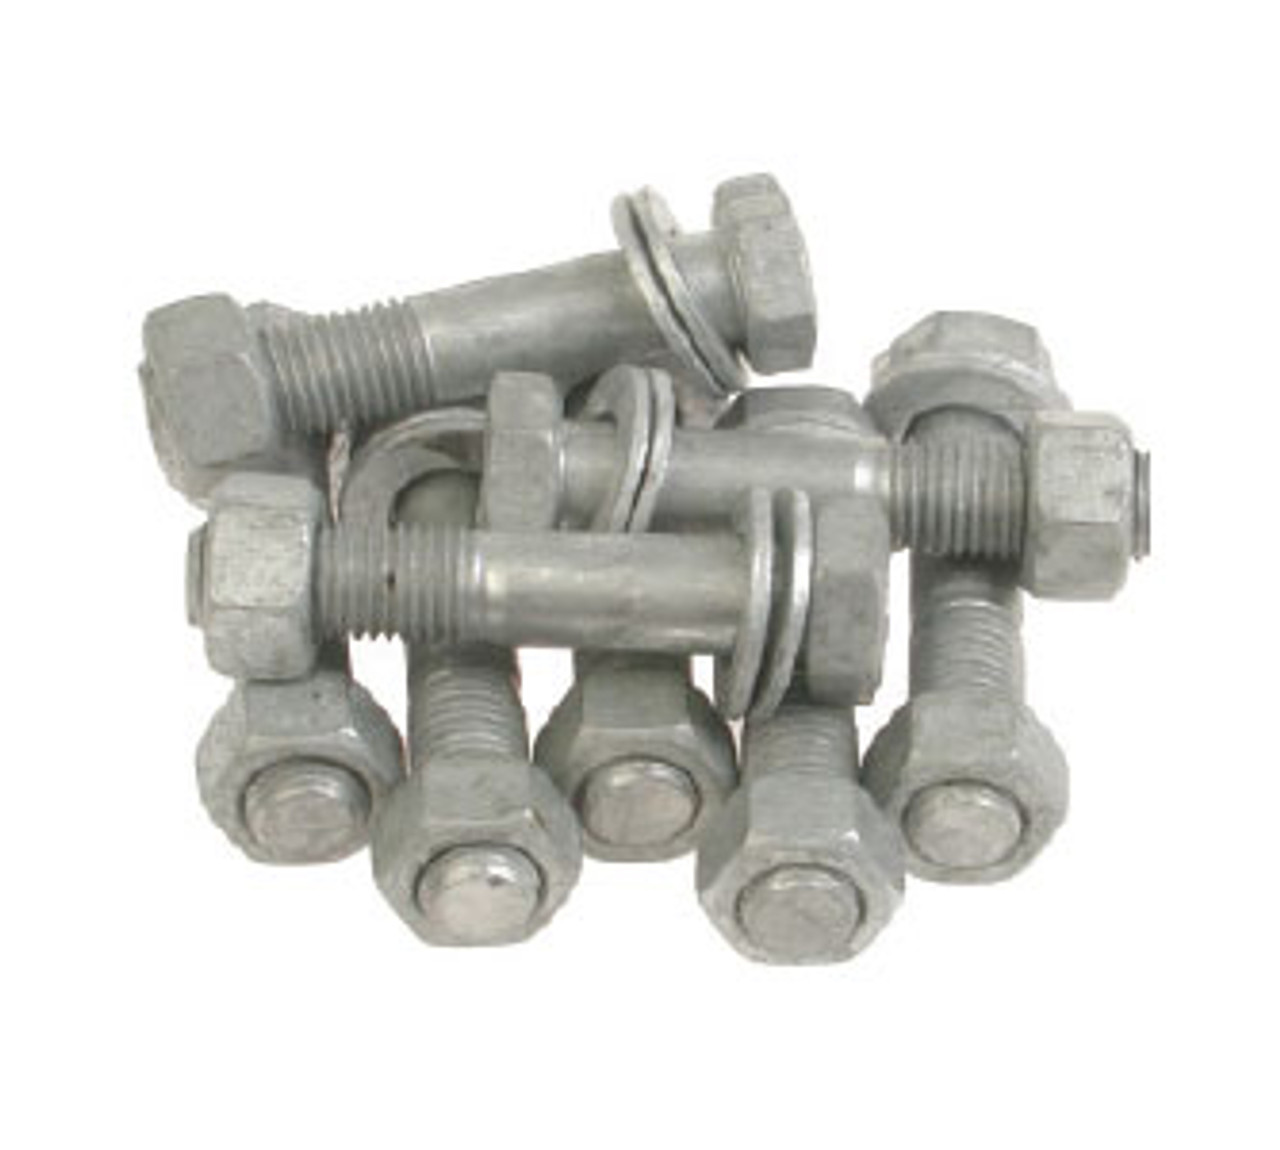 Bolt Set - PE to Steel Flange Connection (Stainless Steel) - ANSI 150 PE 125 - ANSI 150 - 22 x 8